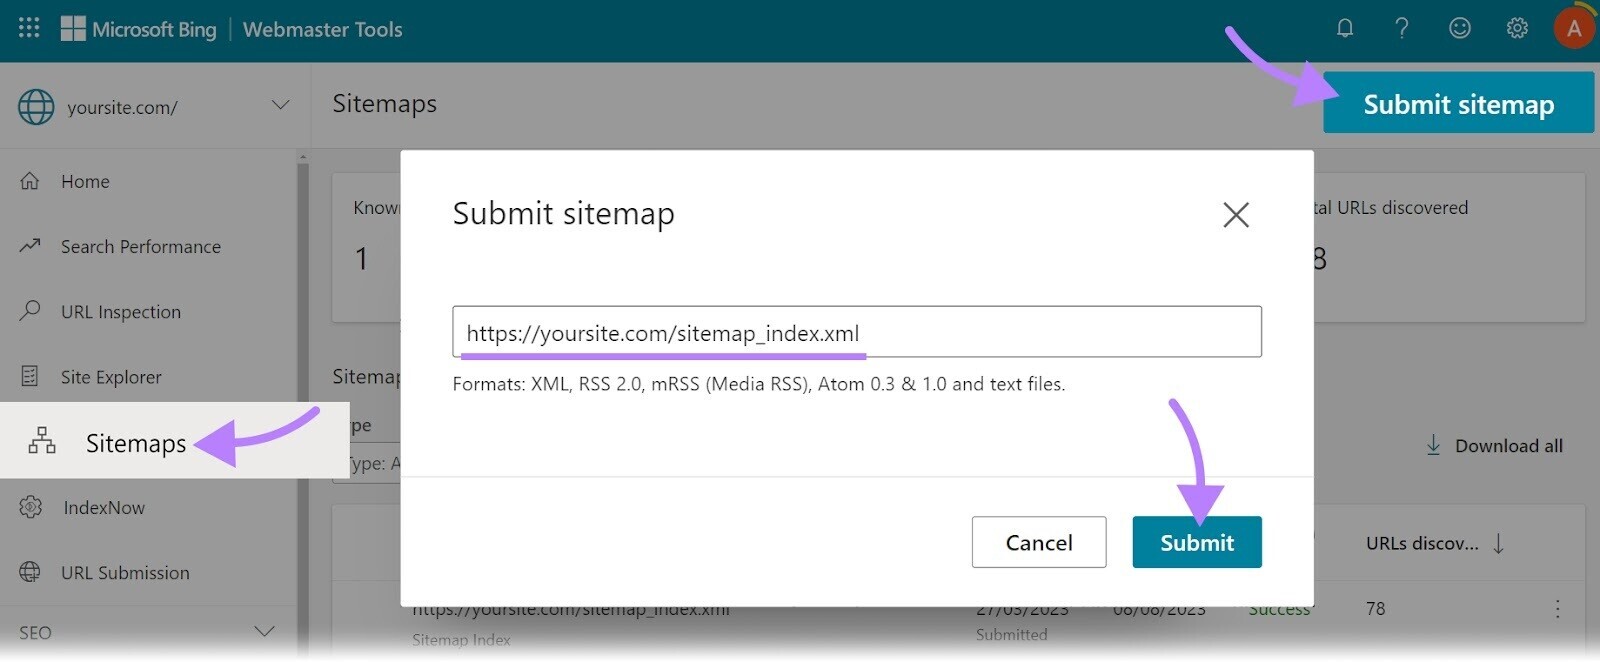 ،w to submit your sitemap to Bing